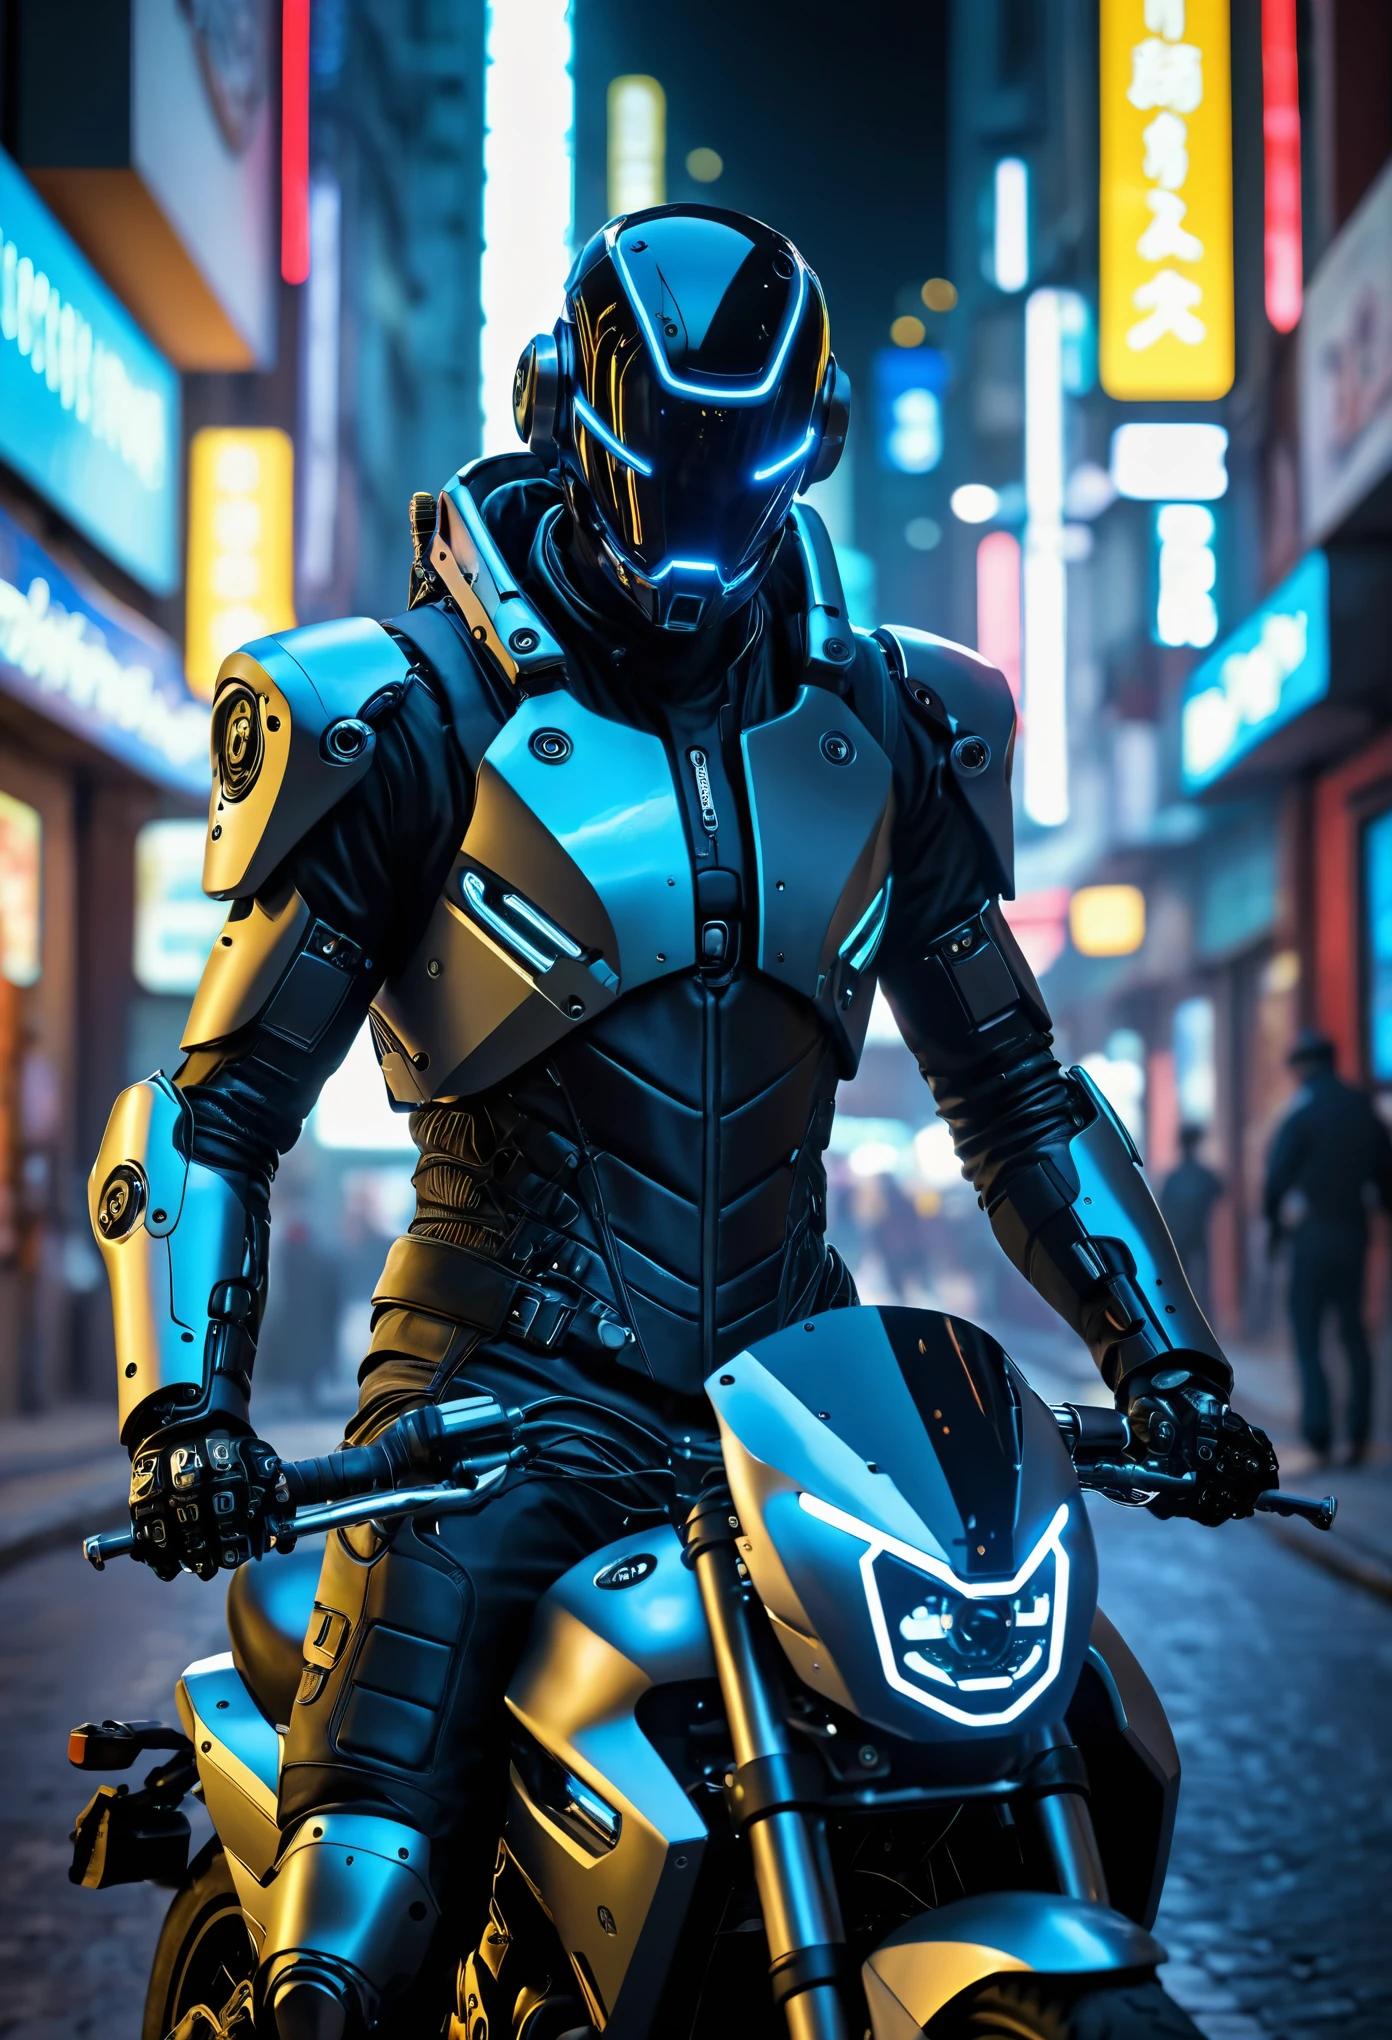 (portrait photo of (fatal boy:1.4) (riding a motorcycle, in futuristic suit:1.2)), (fatal boy riding a motorcycle:1.1), (looking to the camera:1.1), (looking at the viewer:1.1), dramatic lighting, ((mechanical prosthetics, robot hands)), action pose, (motorcycle), BREAK, dynamic, Vibrant, action packed, detailed character design, (professional photo of fatal boy:1.2), (extremely detailed fatal boy face:1.4), (fatal boy riding a motorcycle:1.3), 1 man, cyberpunk clothing, cyberpunk, (cyberpunk background:1.2), (extremely detailed cyberpunk background:1.3), extremely detailed background, cyberpunk body modification, cyberpunk 2077 body modification, (neon city background), cyberpunk suit, robot, Science fiction, Alone, whole body, wires and cables, sharp focus, natural lighting, cyberpunk reimagined, neon lights, action pose, showy, bright colors, Science fiction, a dystopian cyberpunk city, neon, cyberpunk 2077, (cyberpunk 2077 cityscape), Masamune Shirow&#39;s art,soft neon light, cinematographic, vivid details, Features of bionic robotics, (Masterpiece, hyper realistic, Best Quality:1.2), Official Art, Extremely detailed CG unity 8k wallpaper, detailed background, Best Quality, expressive eyes, Perfect face, Perfect eyes, perfect anatomy, extremely detailed eyes and face, looking at the viewer, detailed background, Detailed clothing, cinematographic lighting, beautiful 8k, Masterpiece, Best Quality, high quality, HDR, photography by cosmicwonder, High Definition, symmetrical face, volumetric lighting, 24mm, 4k, DSLR, high quality, ultra realistic,